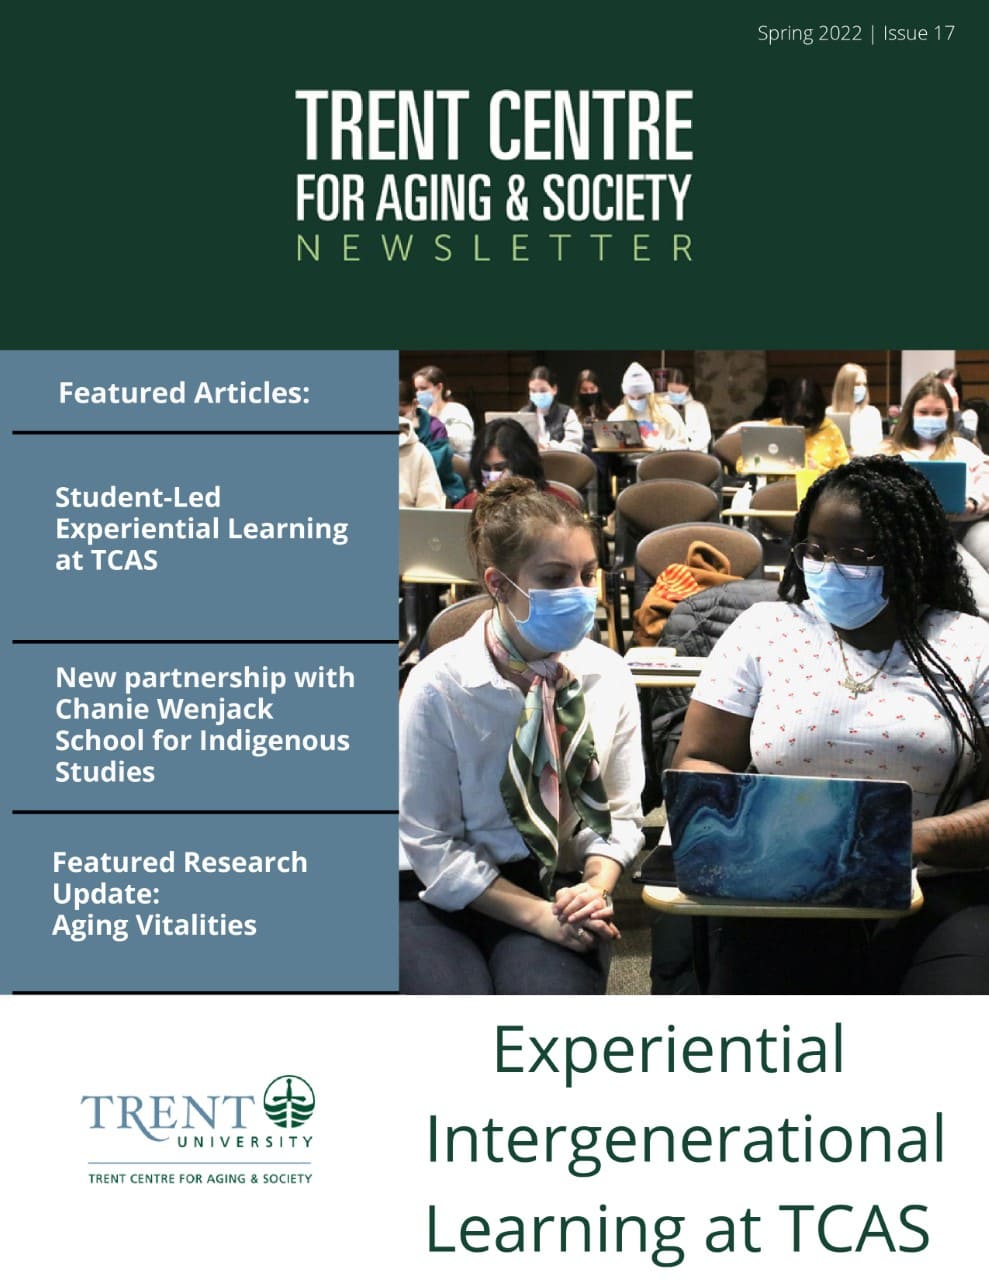 Trent Centre for aging & society - Experiential International Learning at TCAS